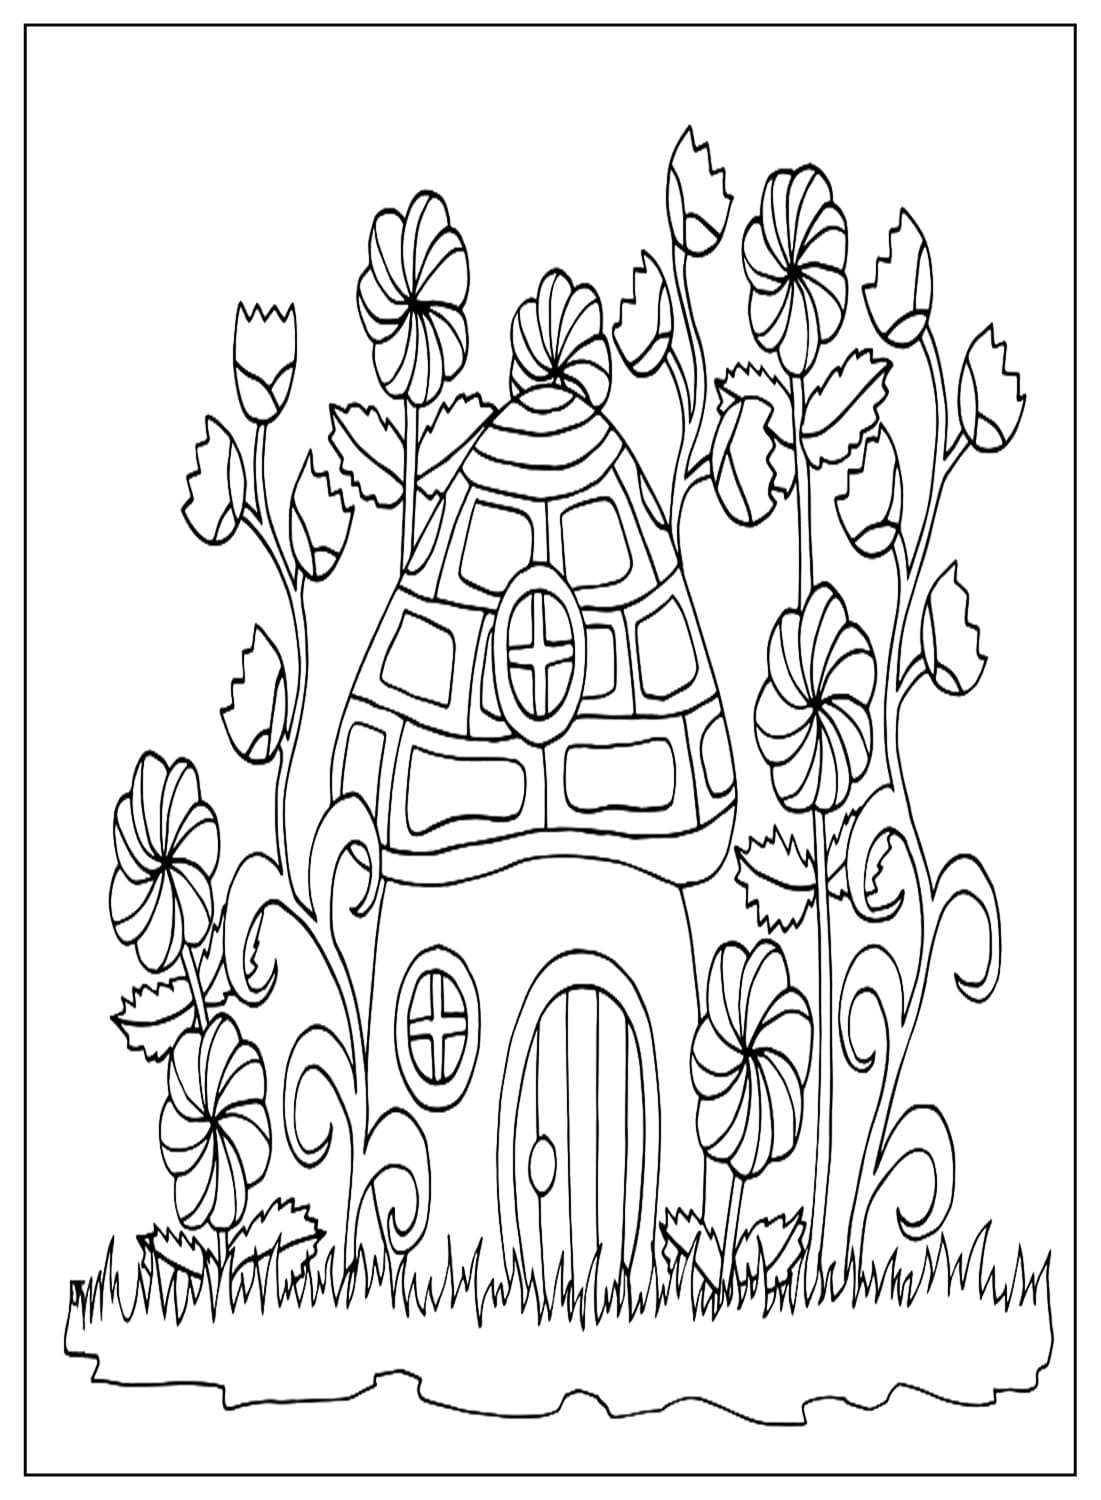 Mushroom House In Spring Coloring Page from Spring